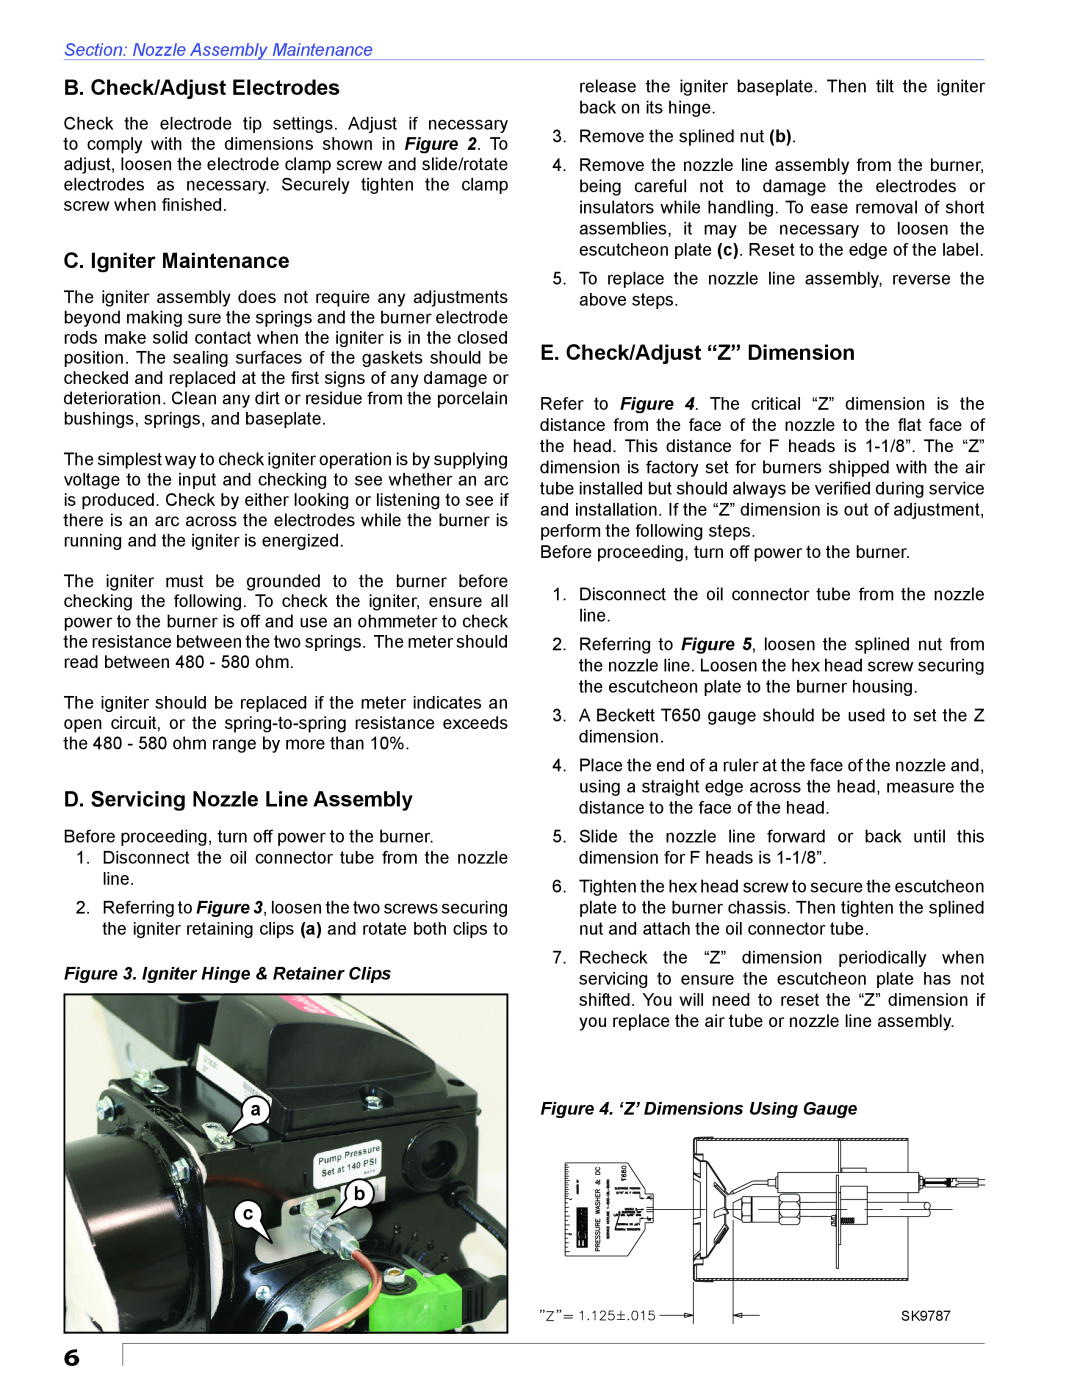 Beckett ADC manual B. Check/Adjust Electrodes, C. Igniter Maintenance, D. Servicing Nozzle Line Assembly, a b c 